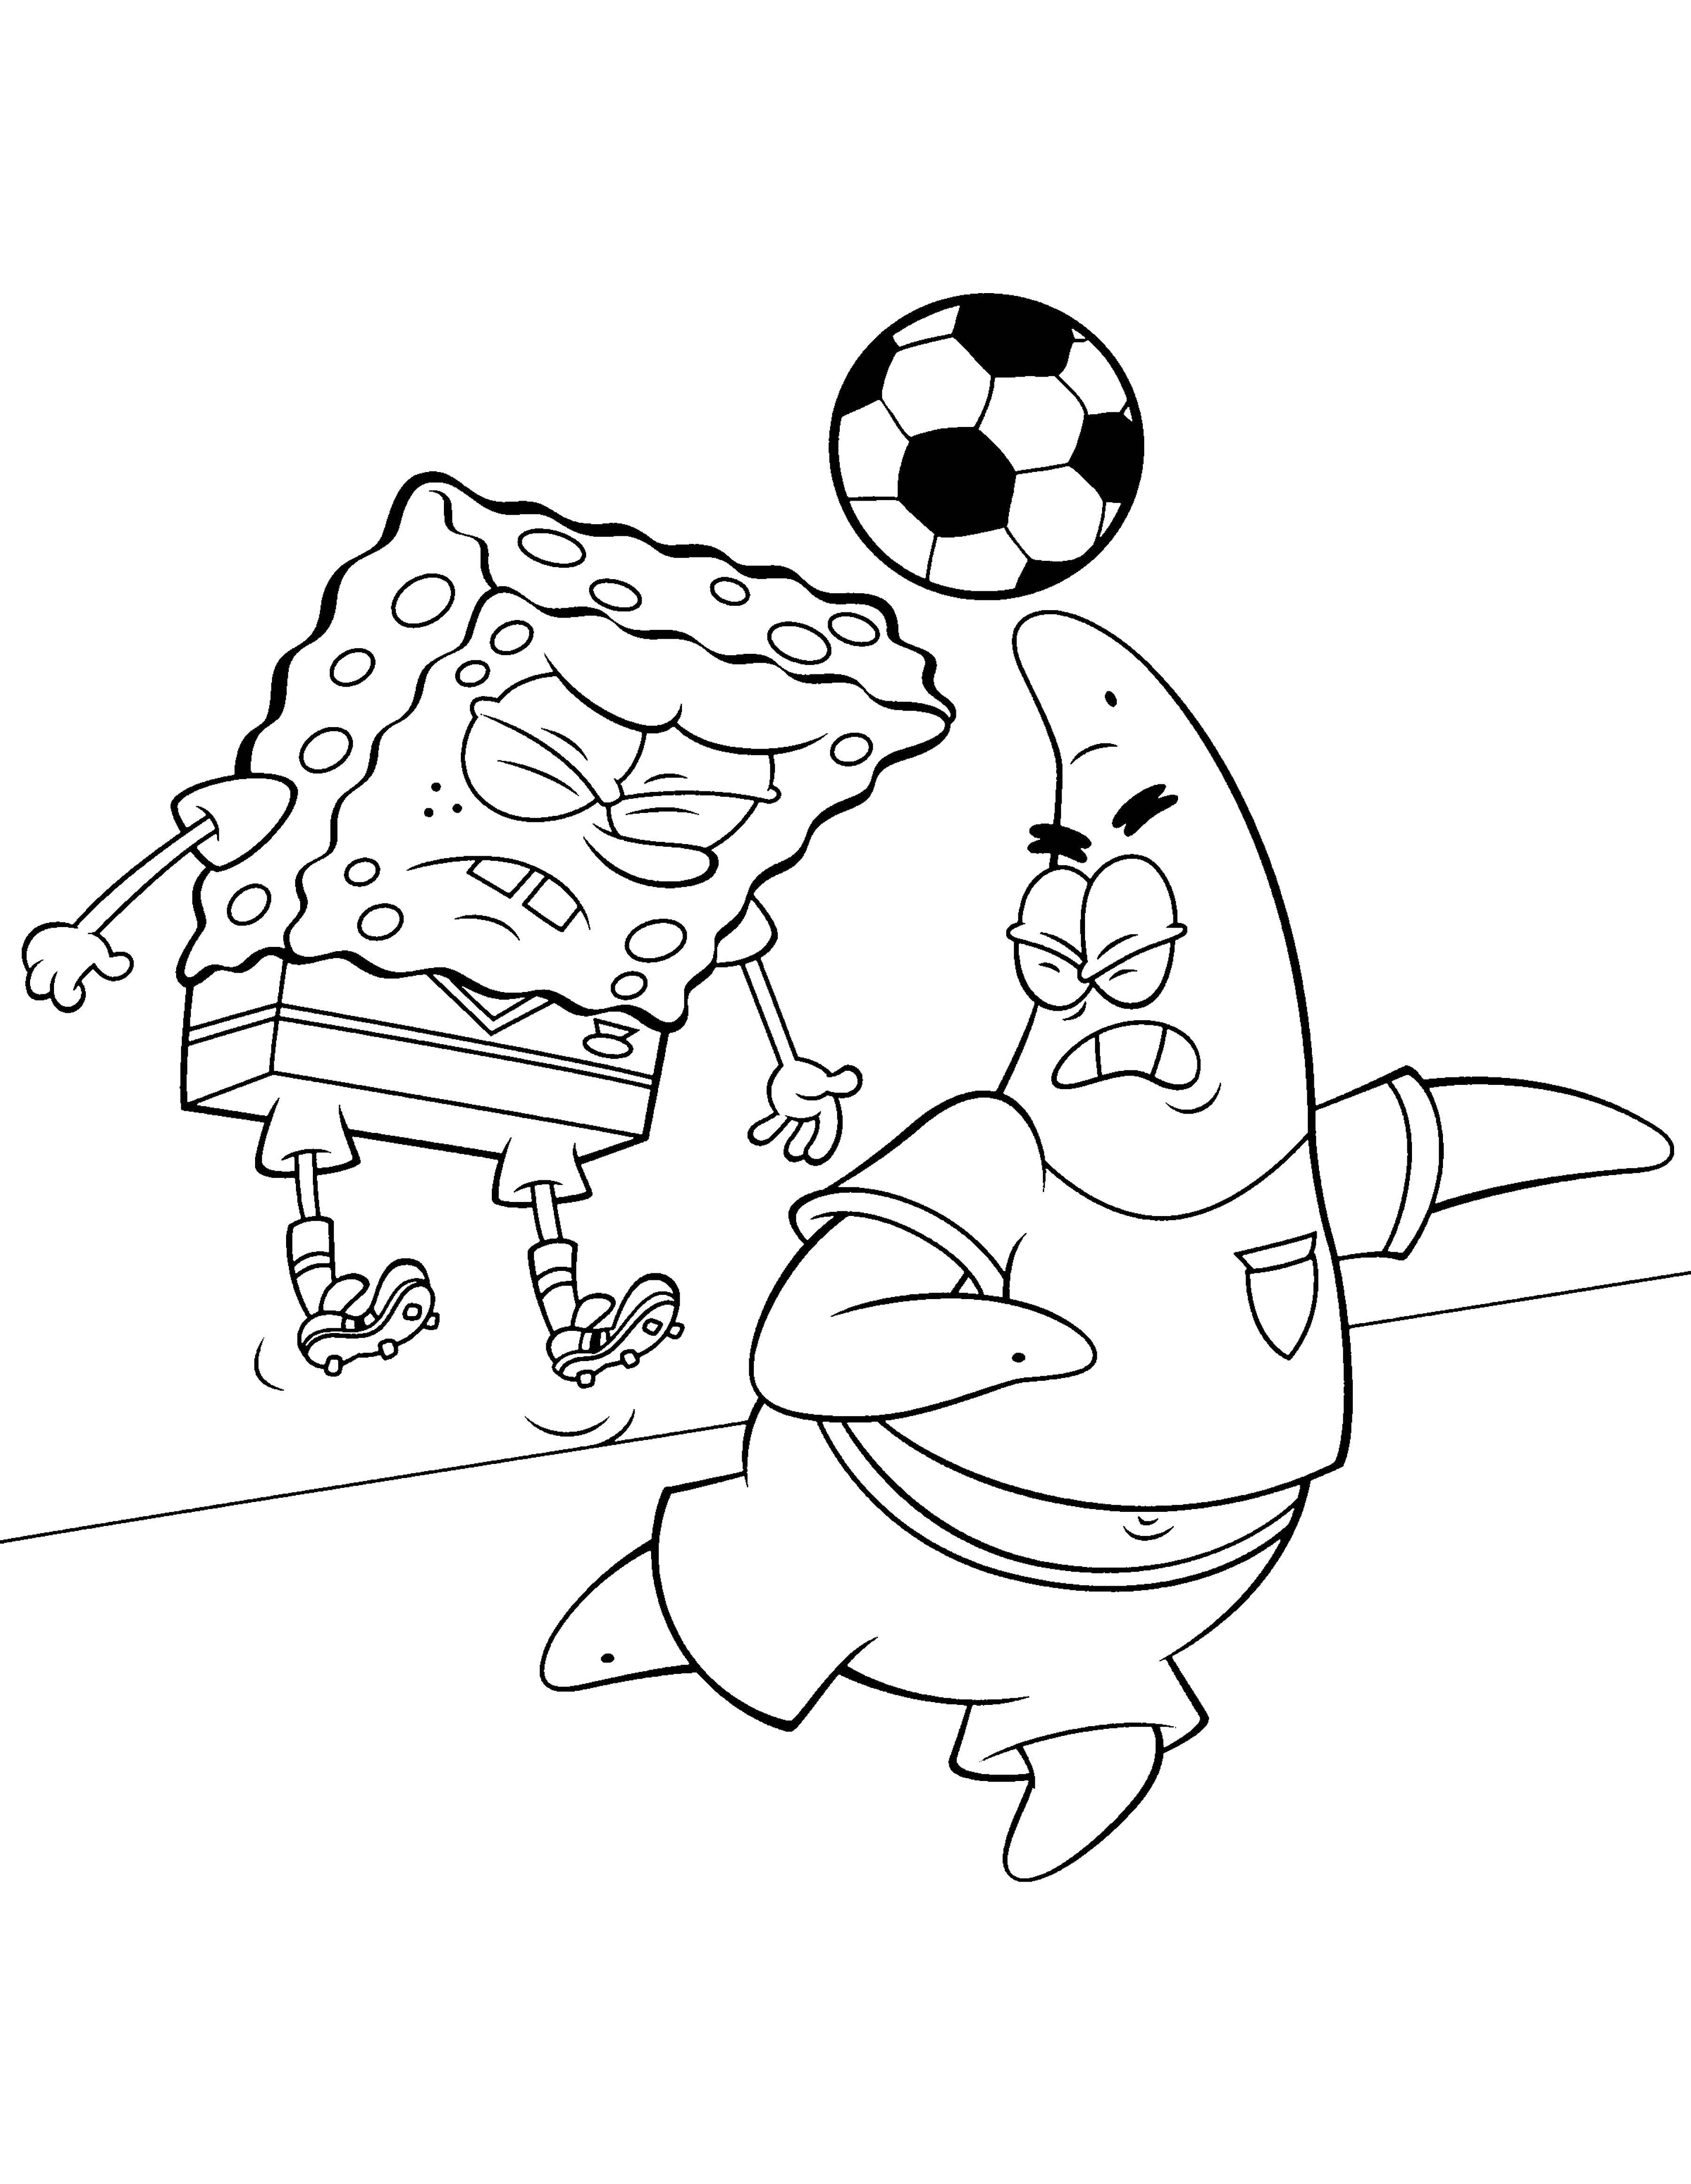 Coloring Spongebob and Patrick. Category Spongebob. Tags:  The spongebob, Patrick, cartoon, football.